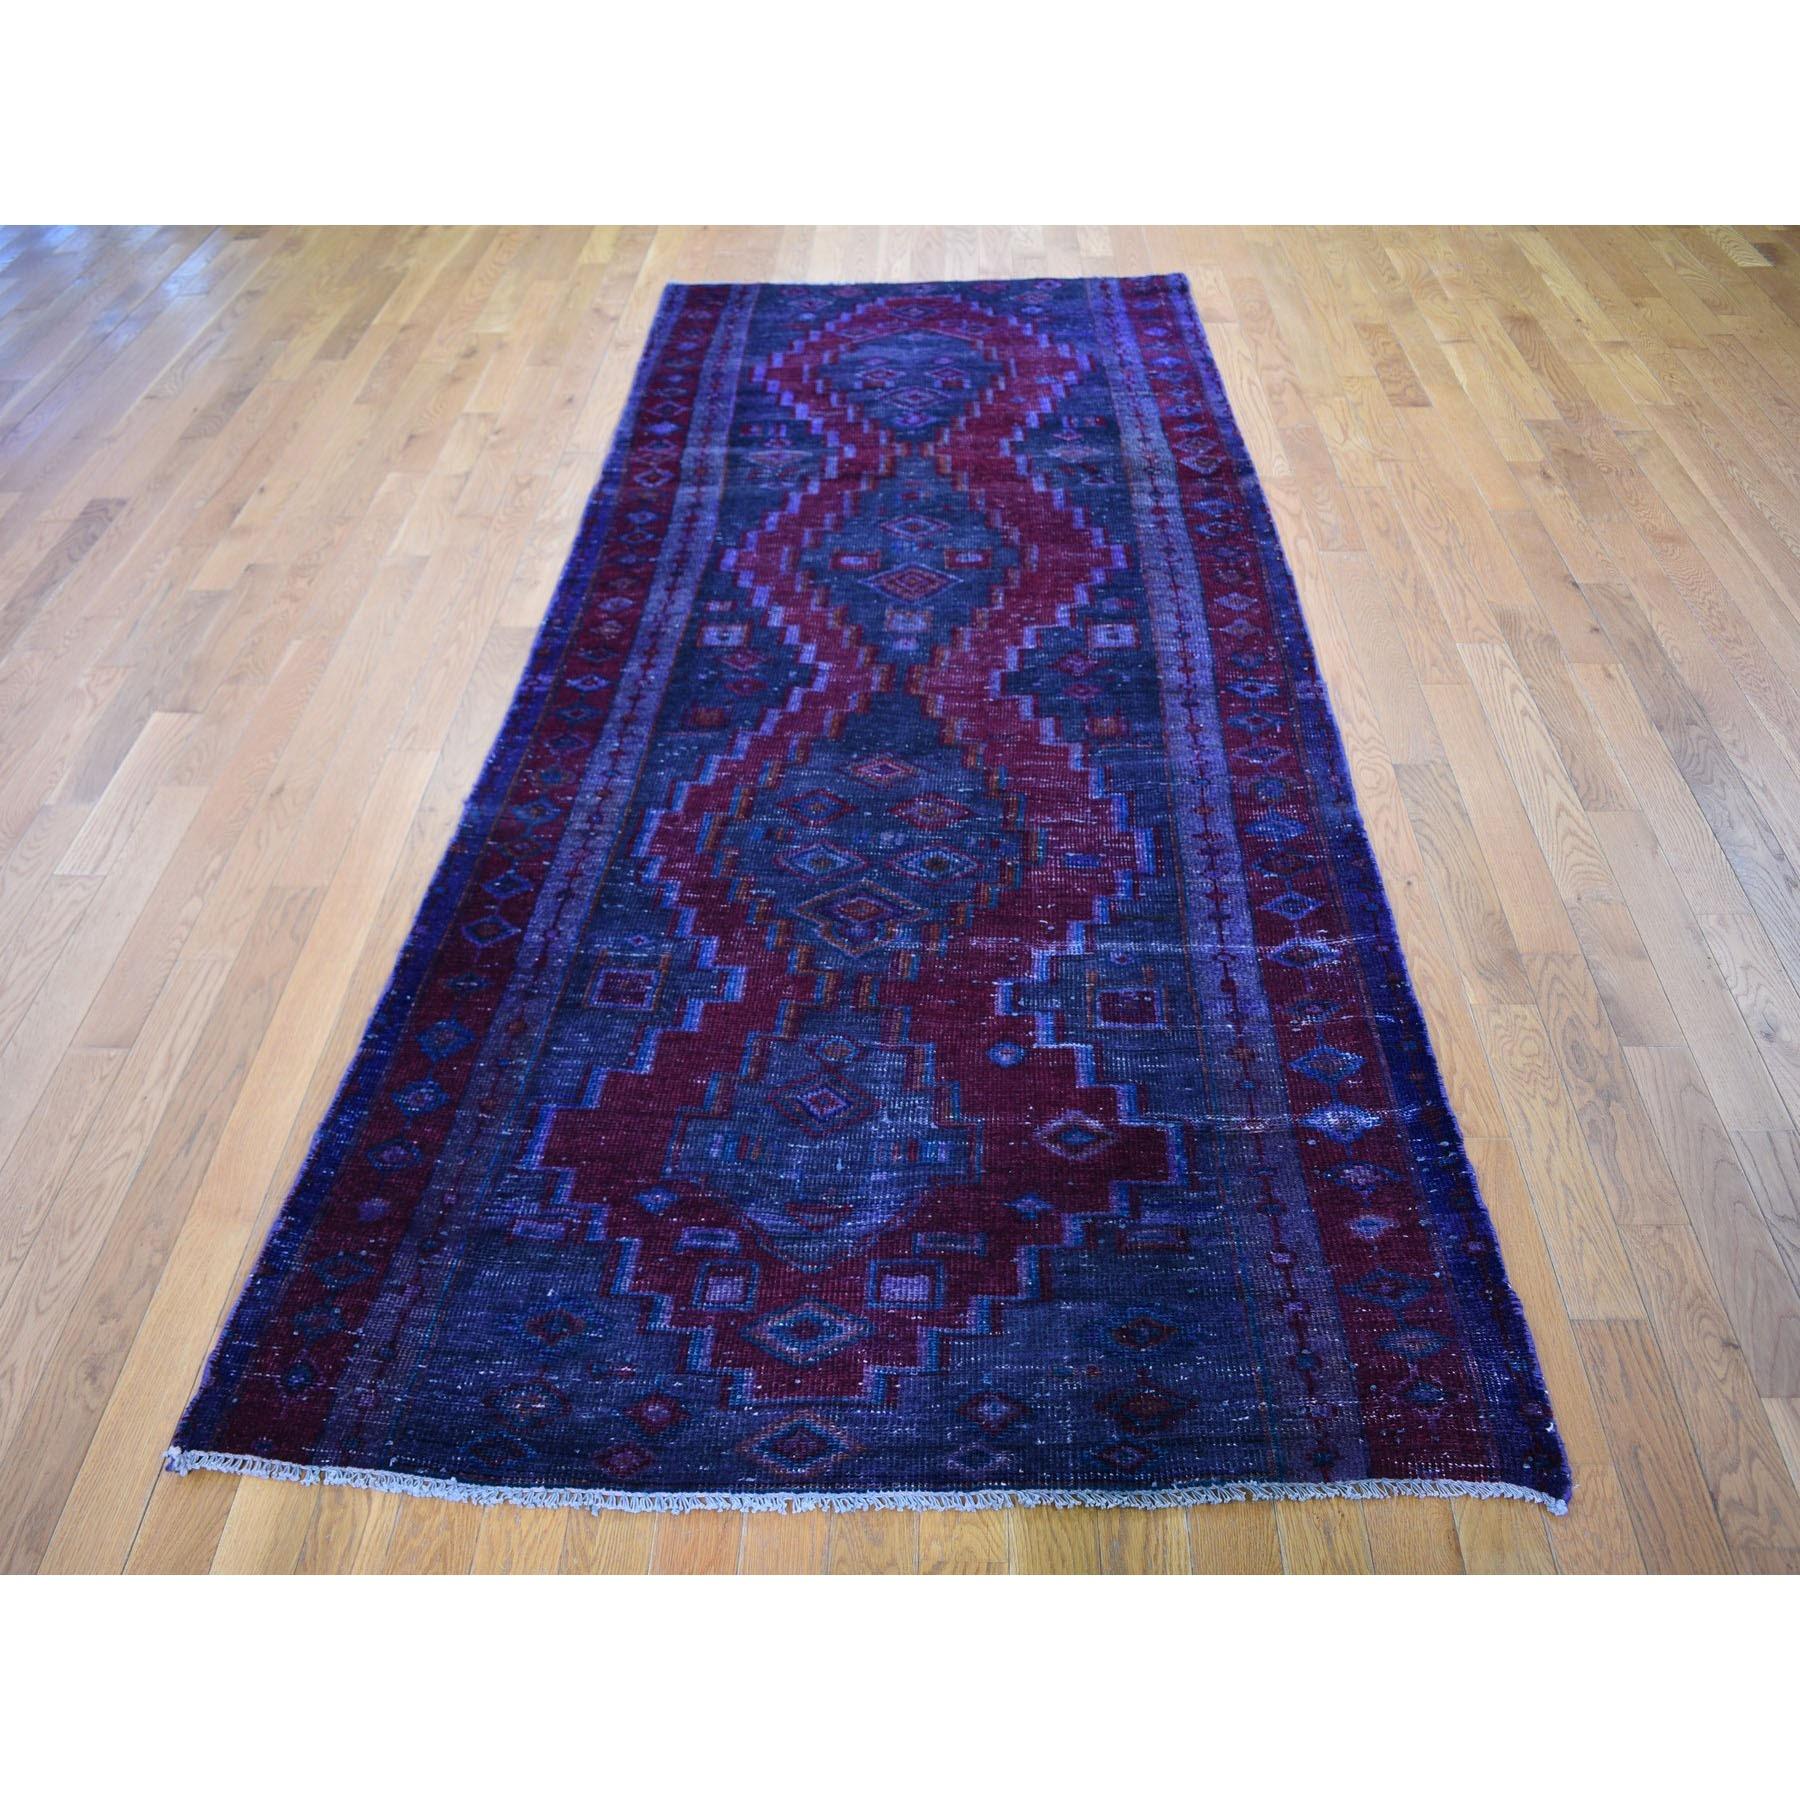 This fabulous hand-knotted carpet has been created and designed for extra strength and durability. This rug has been handcrafted for weeks in the traditional method that is used to make
Exact Rug Size in Feet and Inches : 4'1